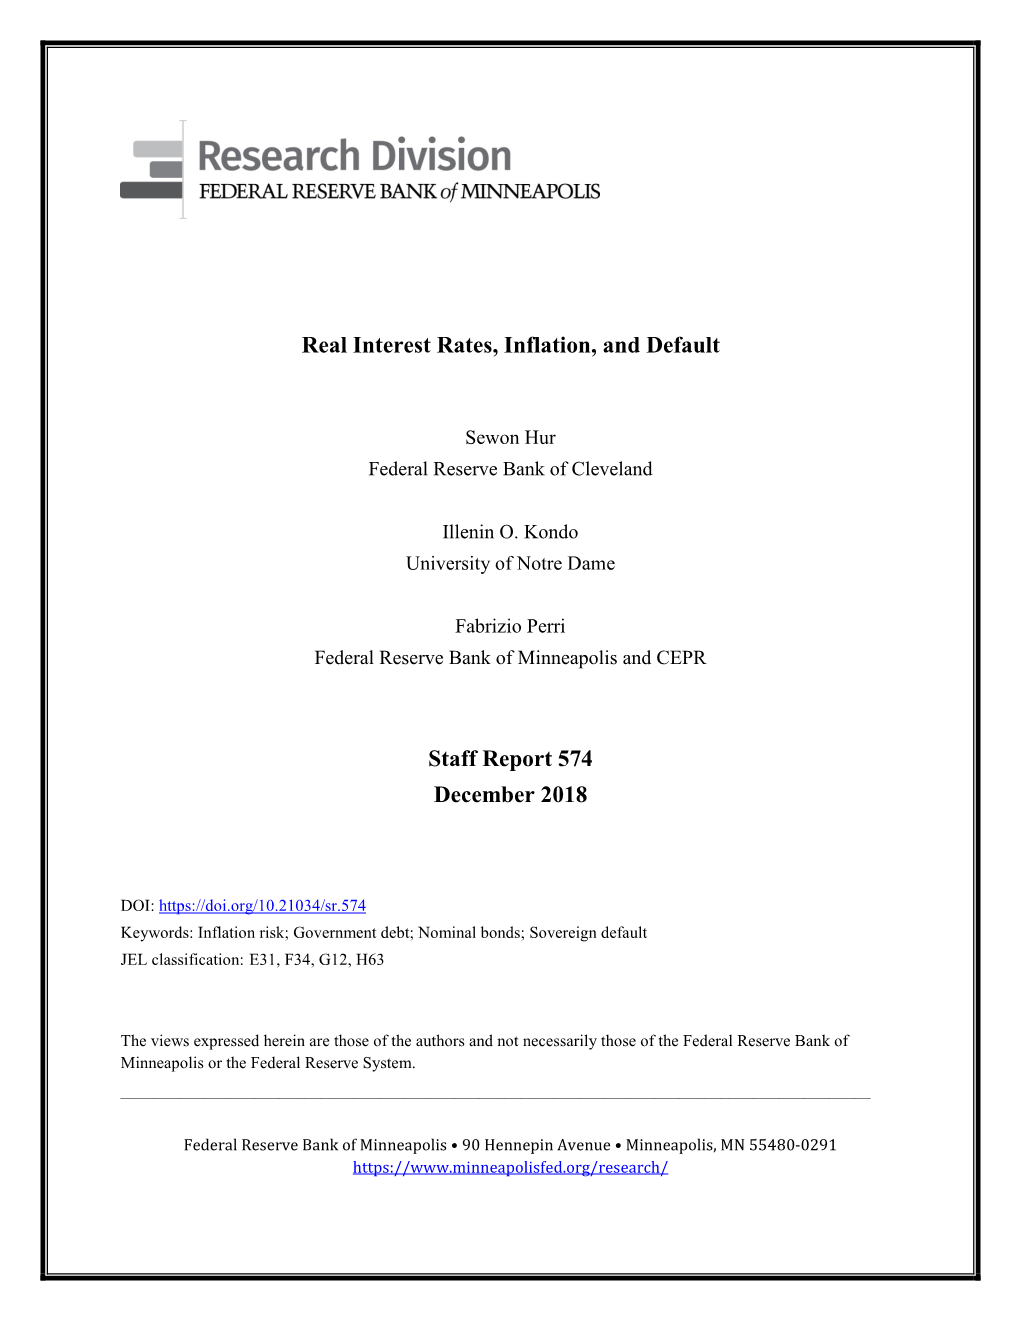 Real Interest Rates, Inflation, and Default